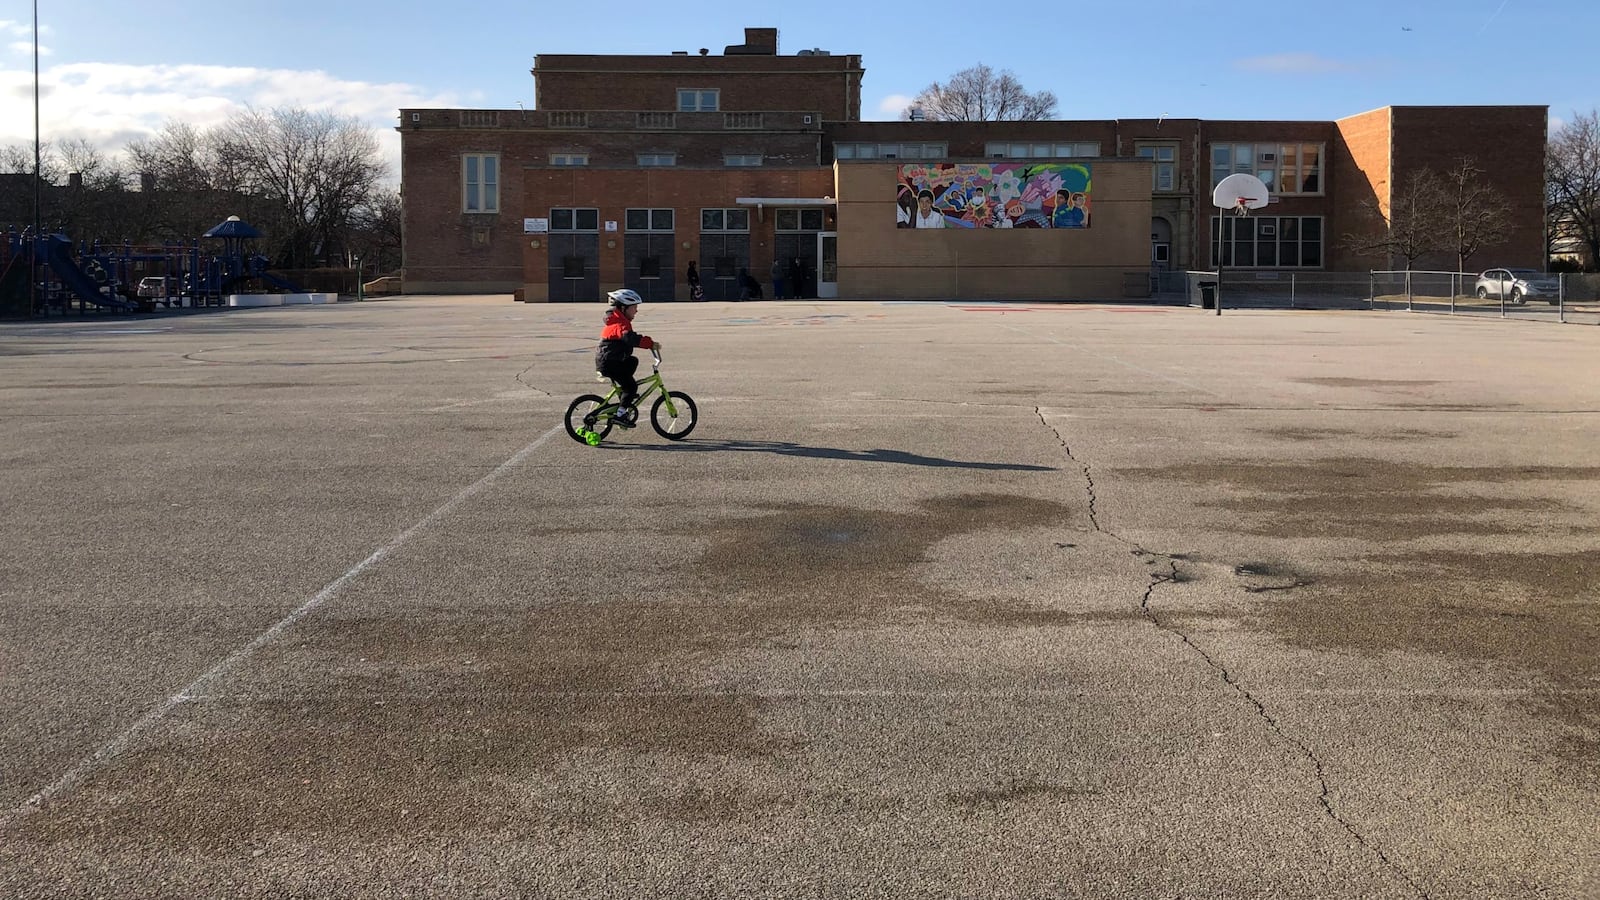 A child rides a bicycle at a shuttered Chicago public school the first week that campuses closed.